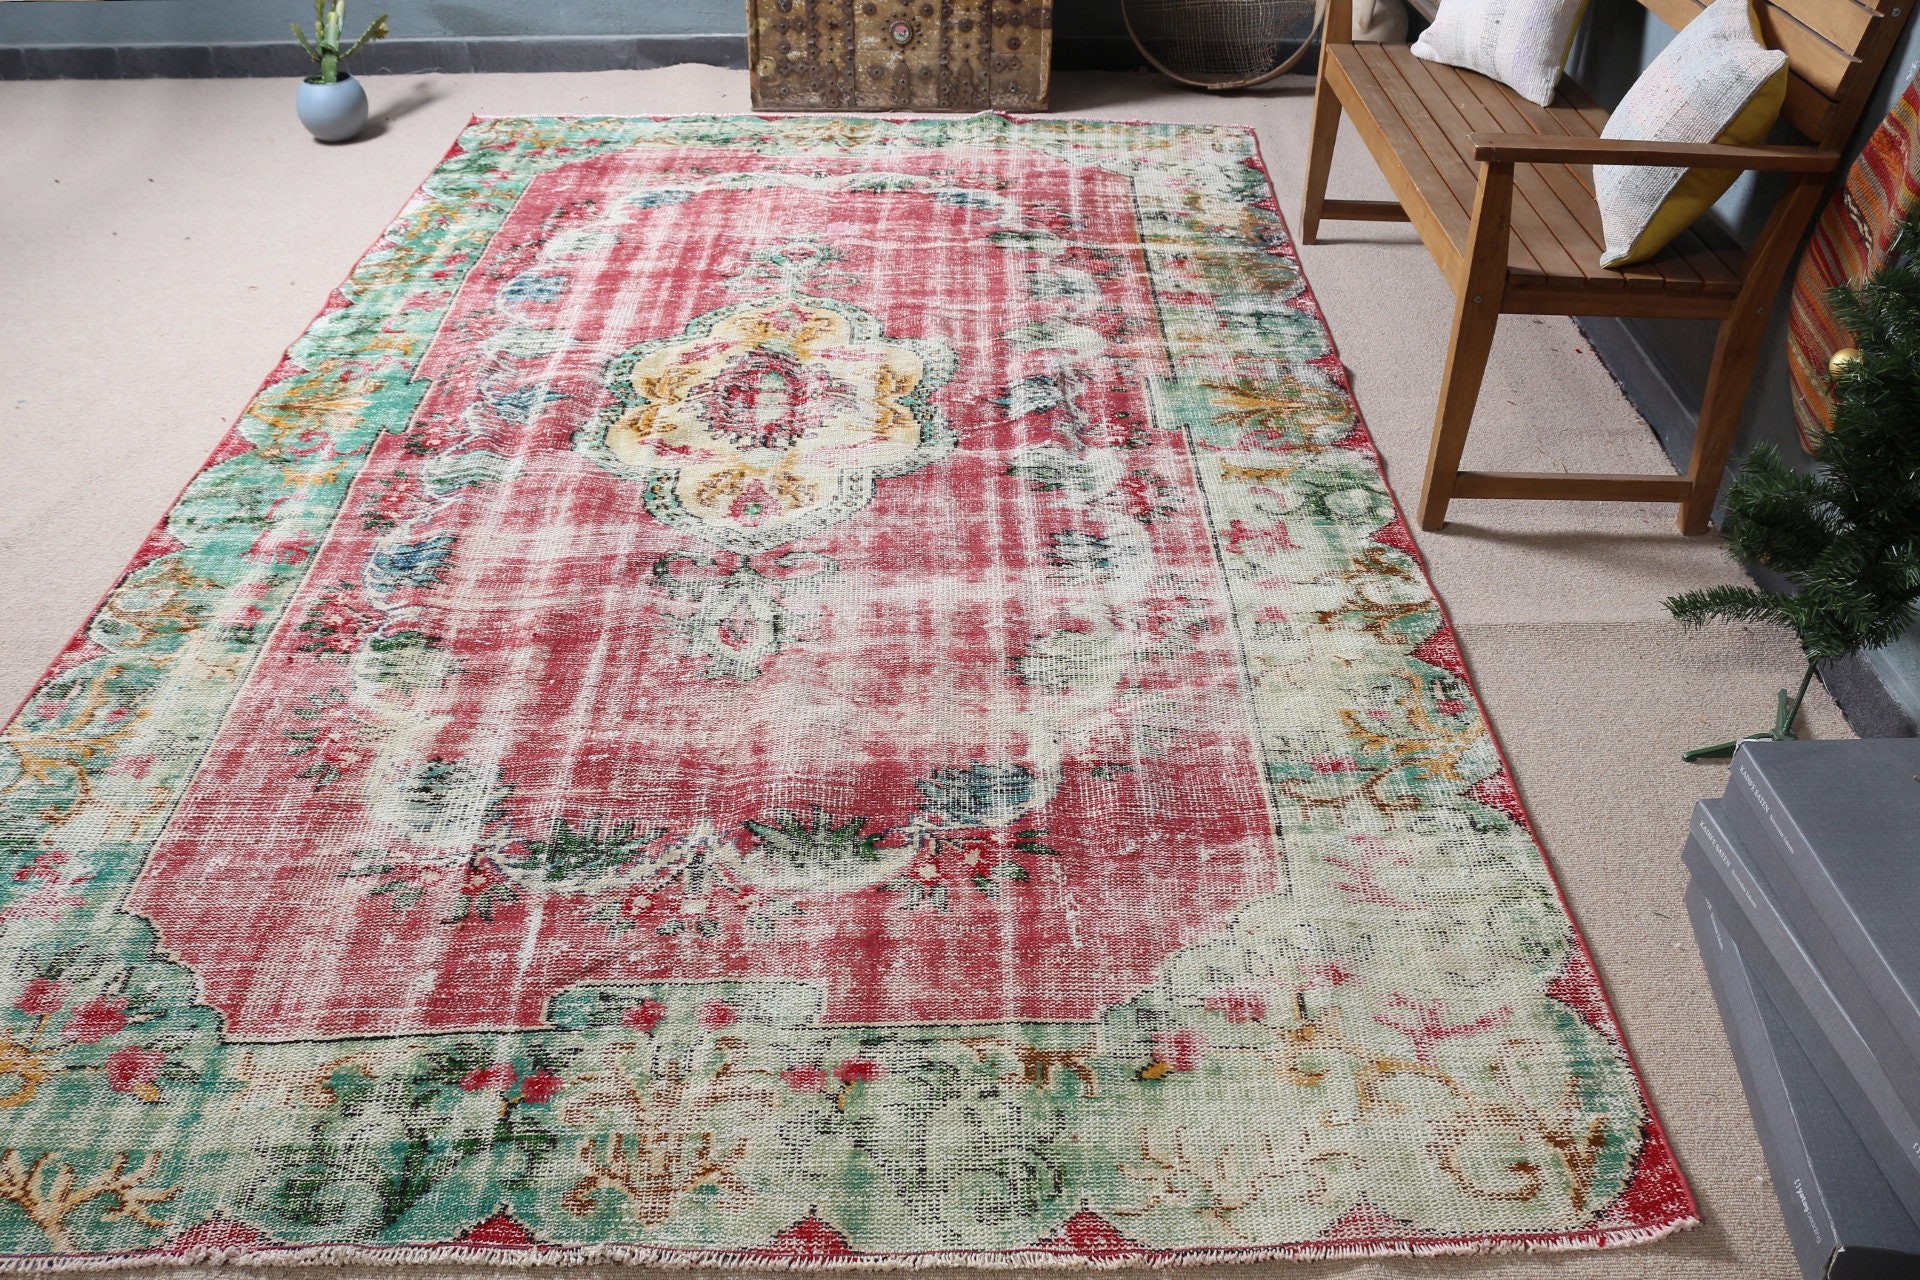 Red Antique Rugs, Kitchen Rugs, 6.8x11.3 ft Oversize Rugs, Tribal Rug, Salon Rugs, Oushak Rug, Dining Room Rug, Vintage Rugs, Turkish Rugs